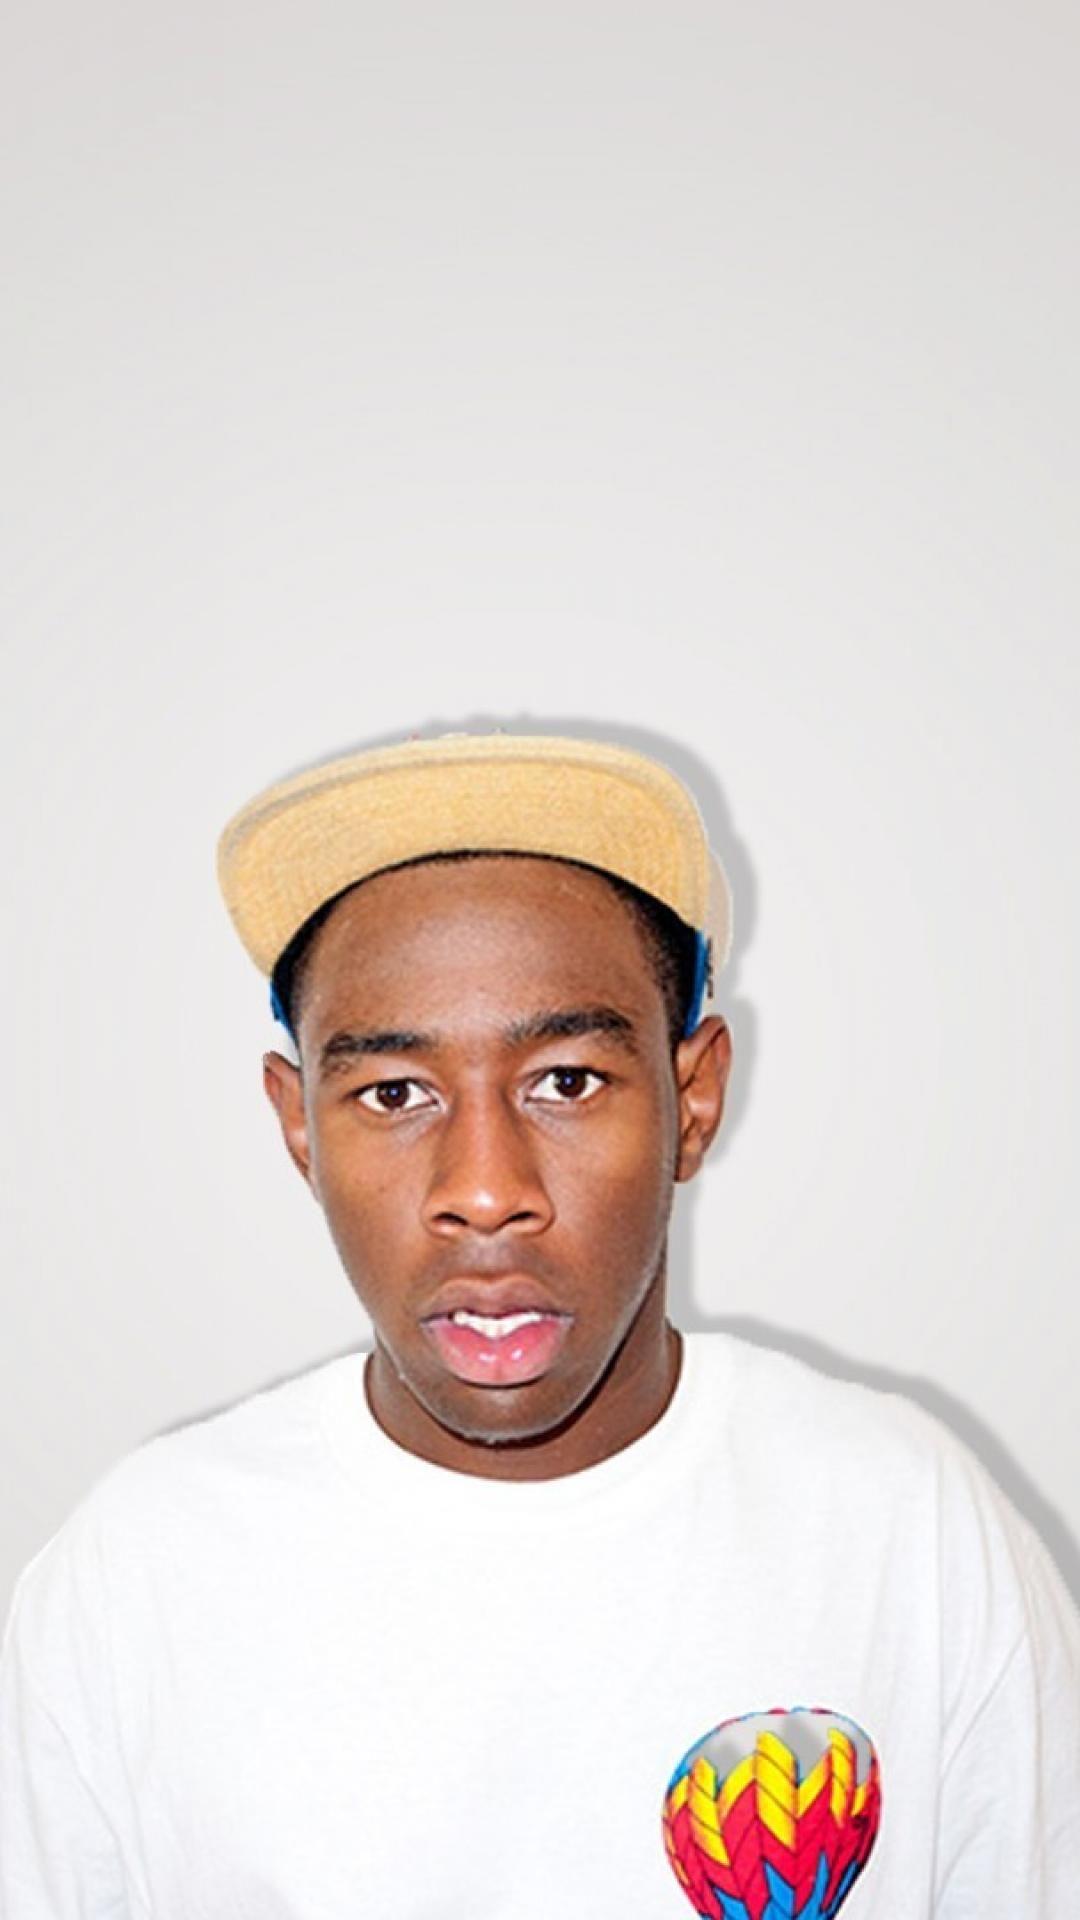 Details more than 82 tyler the creator iphone wallpaper latest - in ...